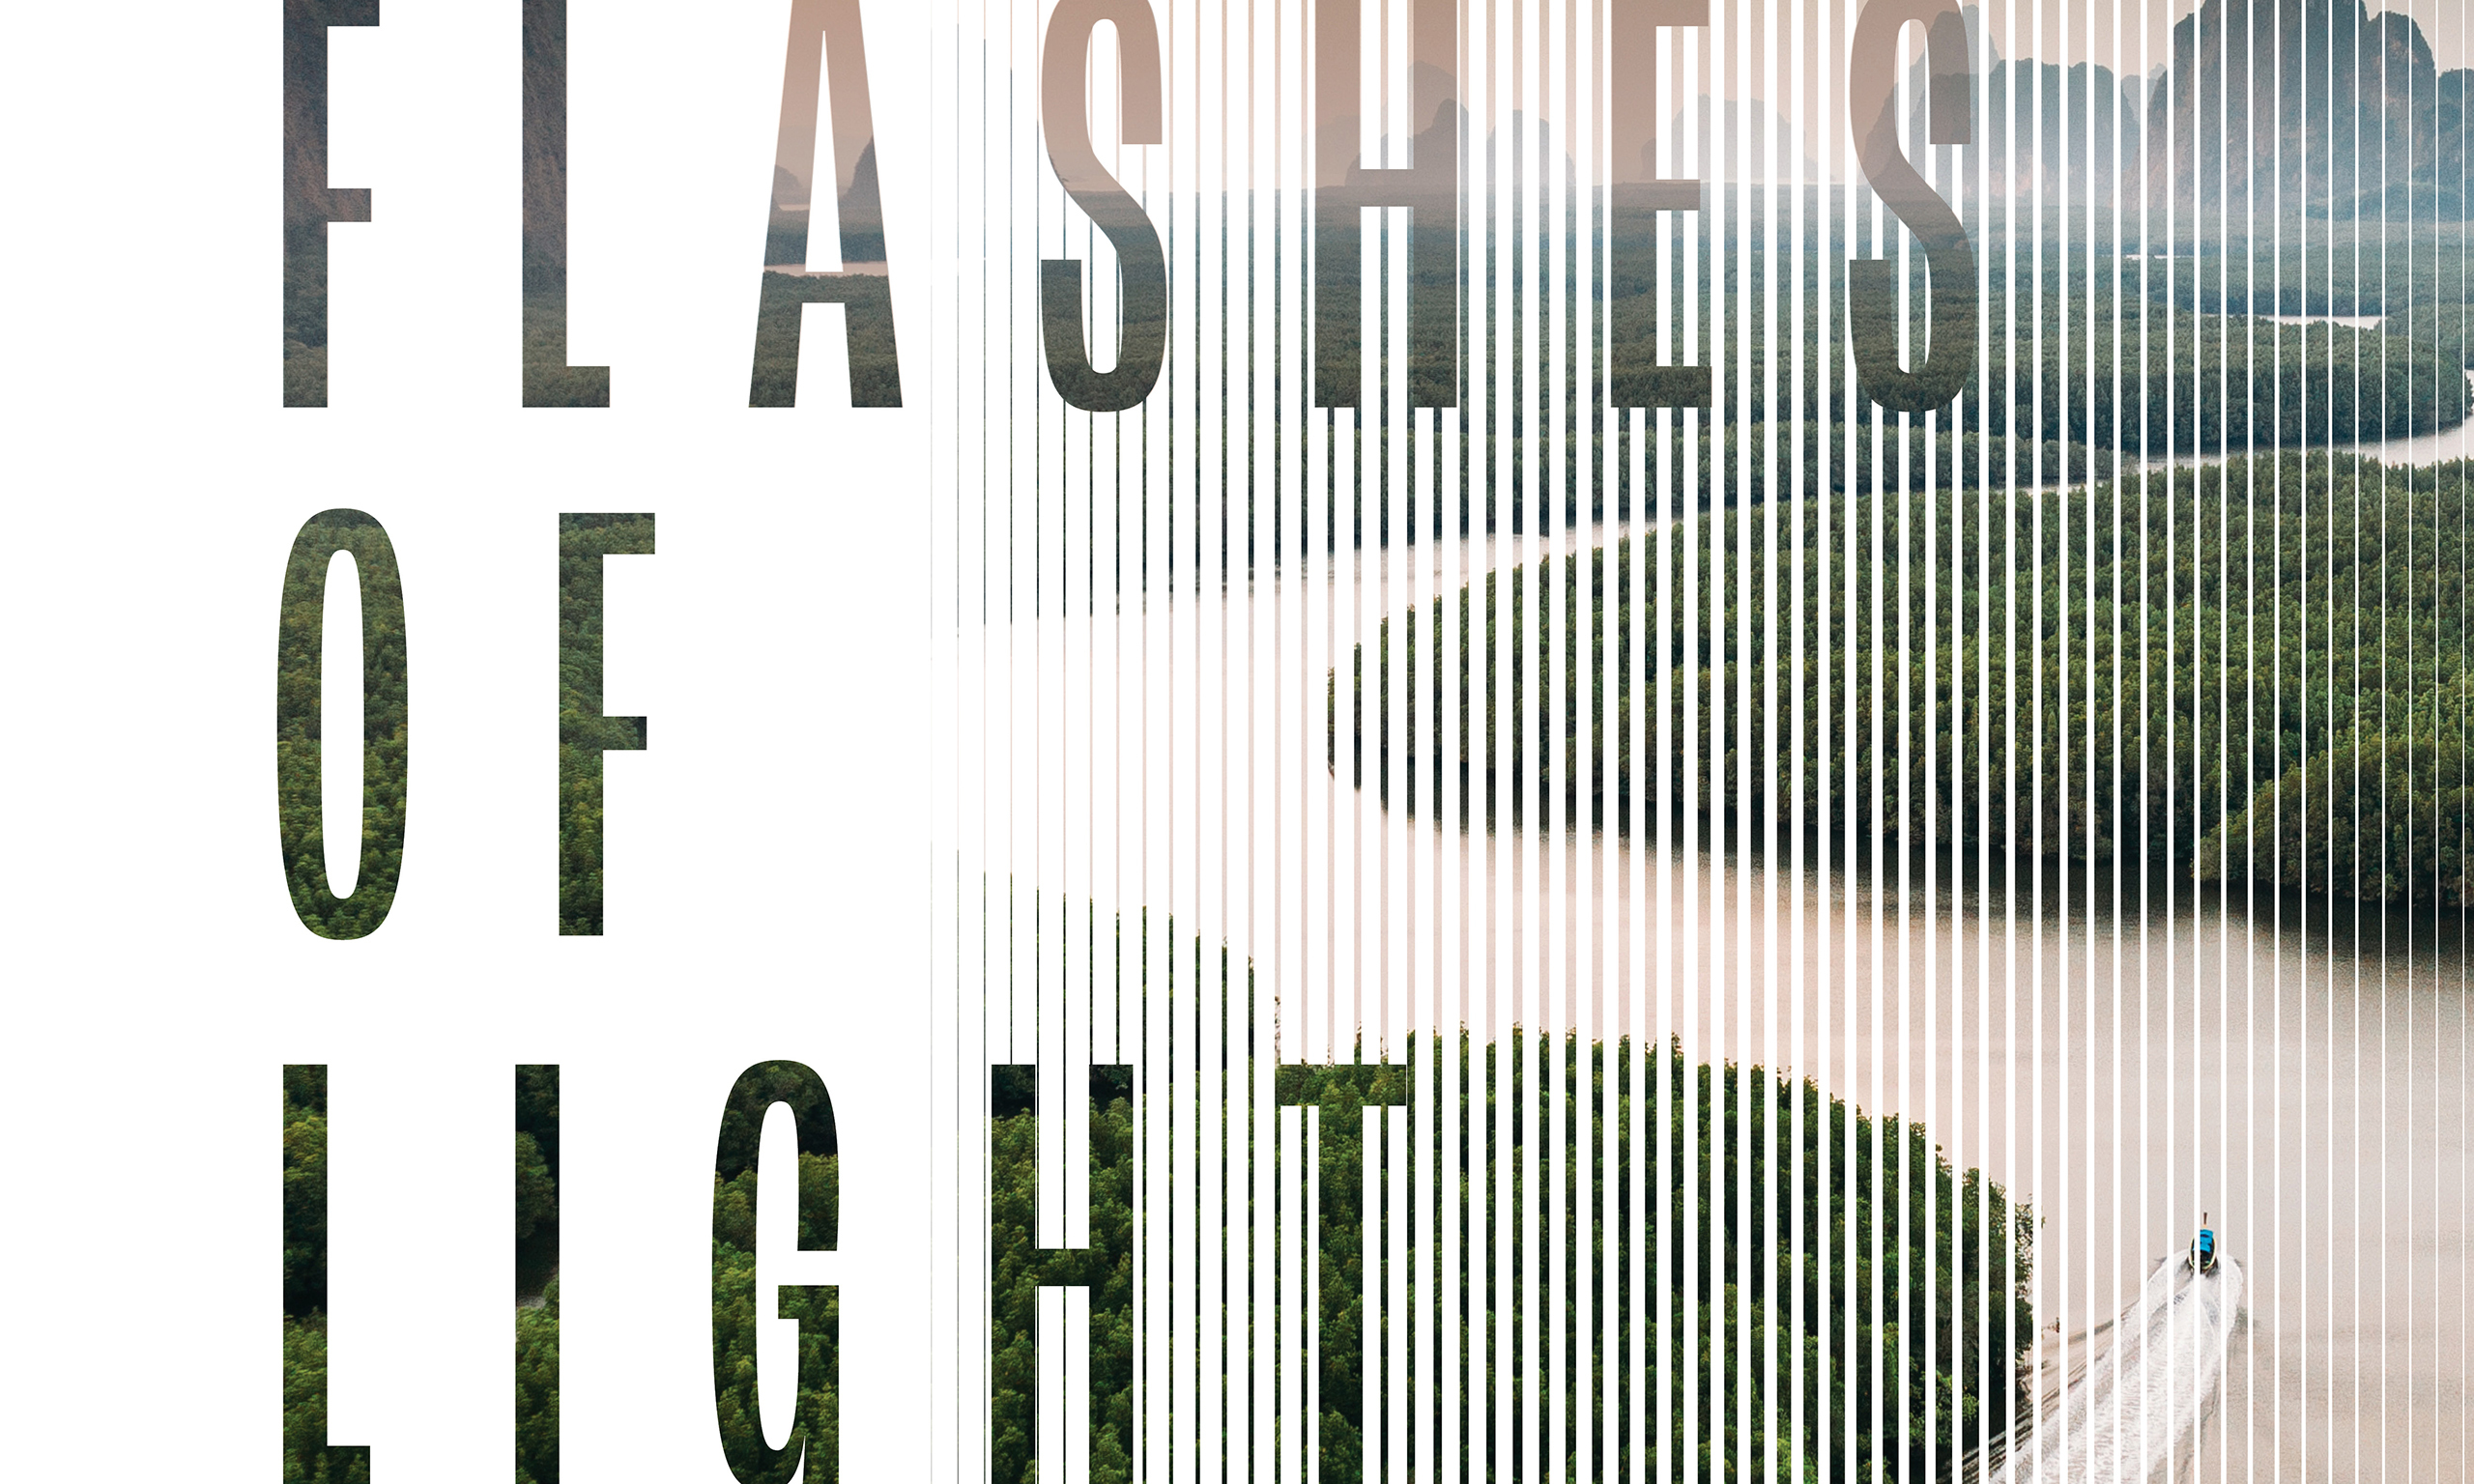 The title "Flashes of Light" overlaid on the image of a river.